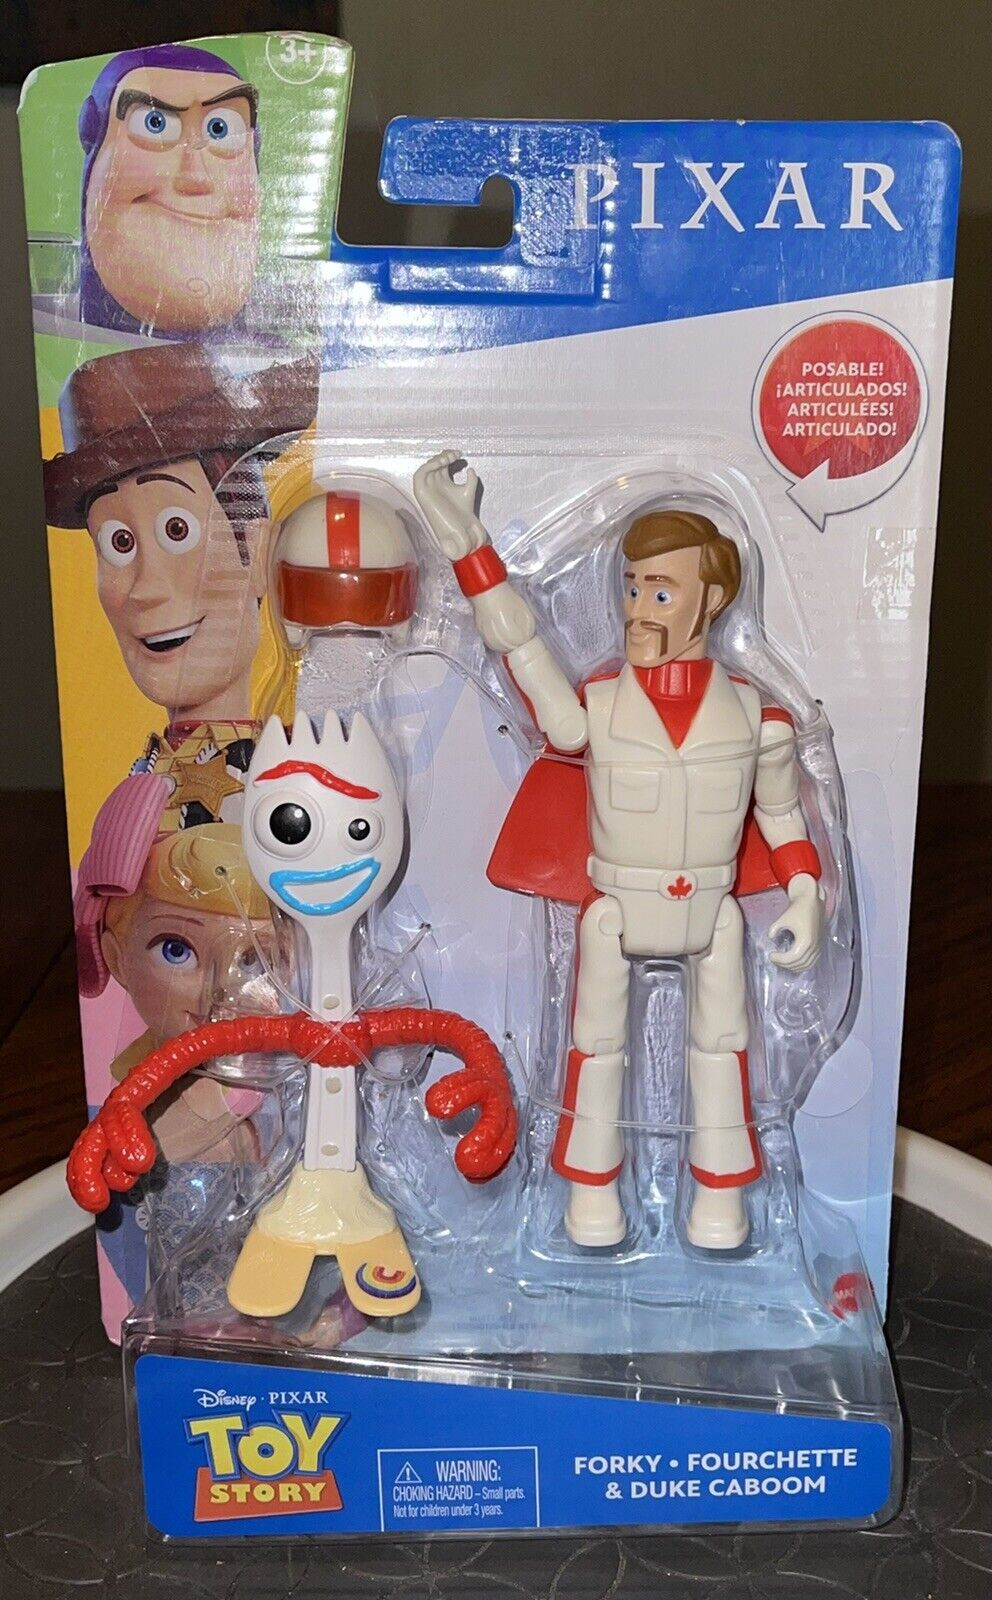 Disney Pixar Toy Story 4 Forky And Duke Caboom Poseable Figure (NEW)